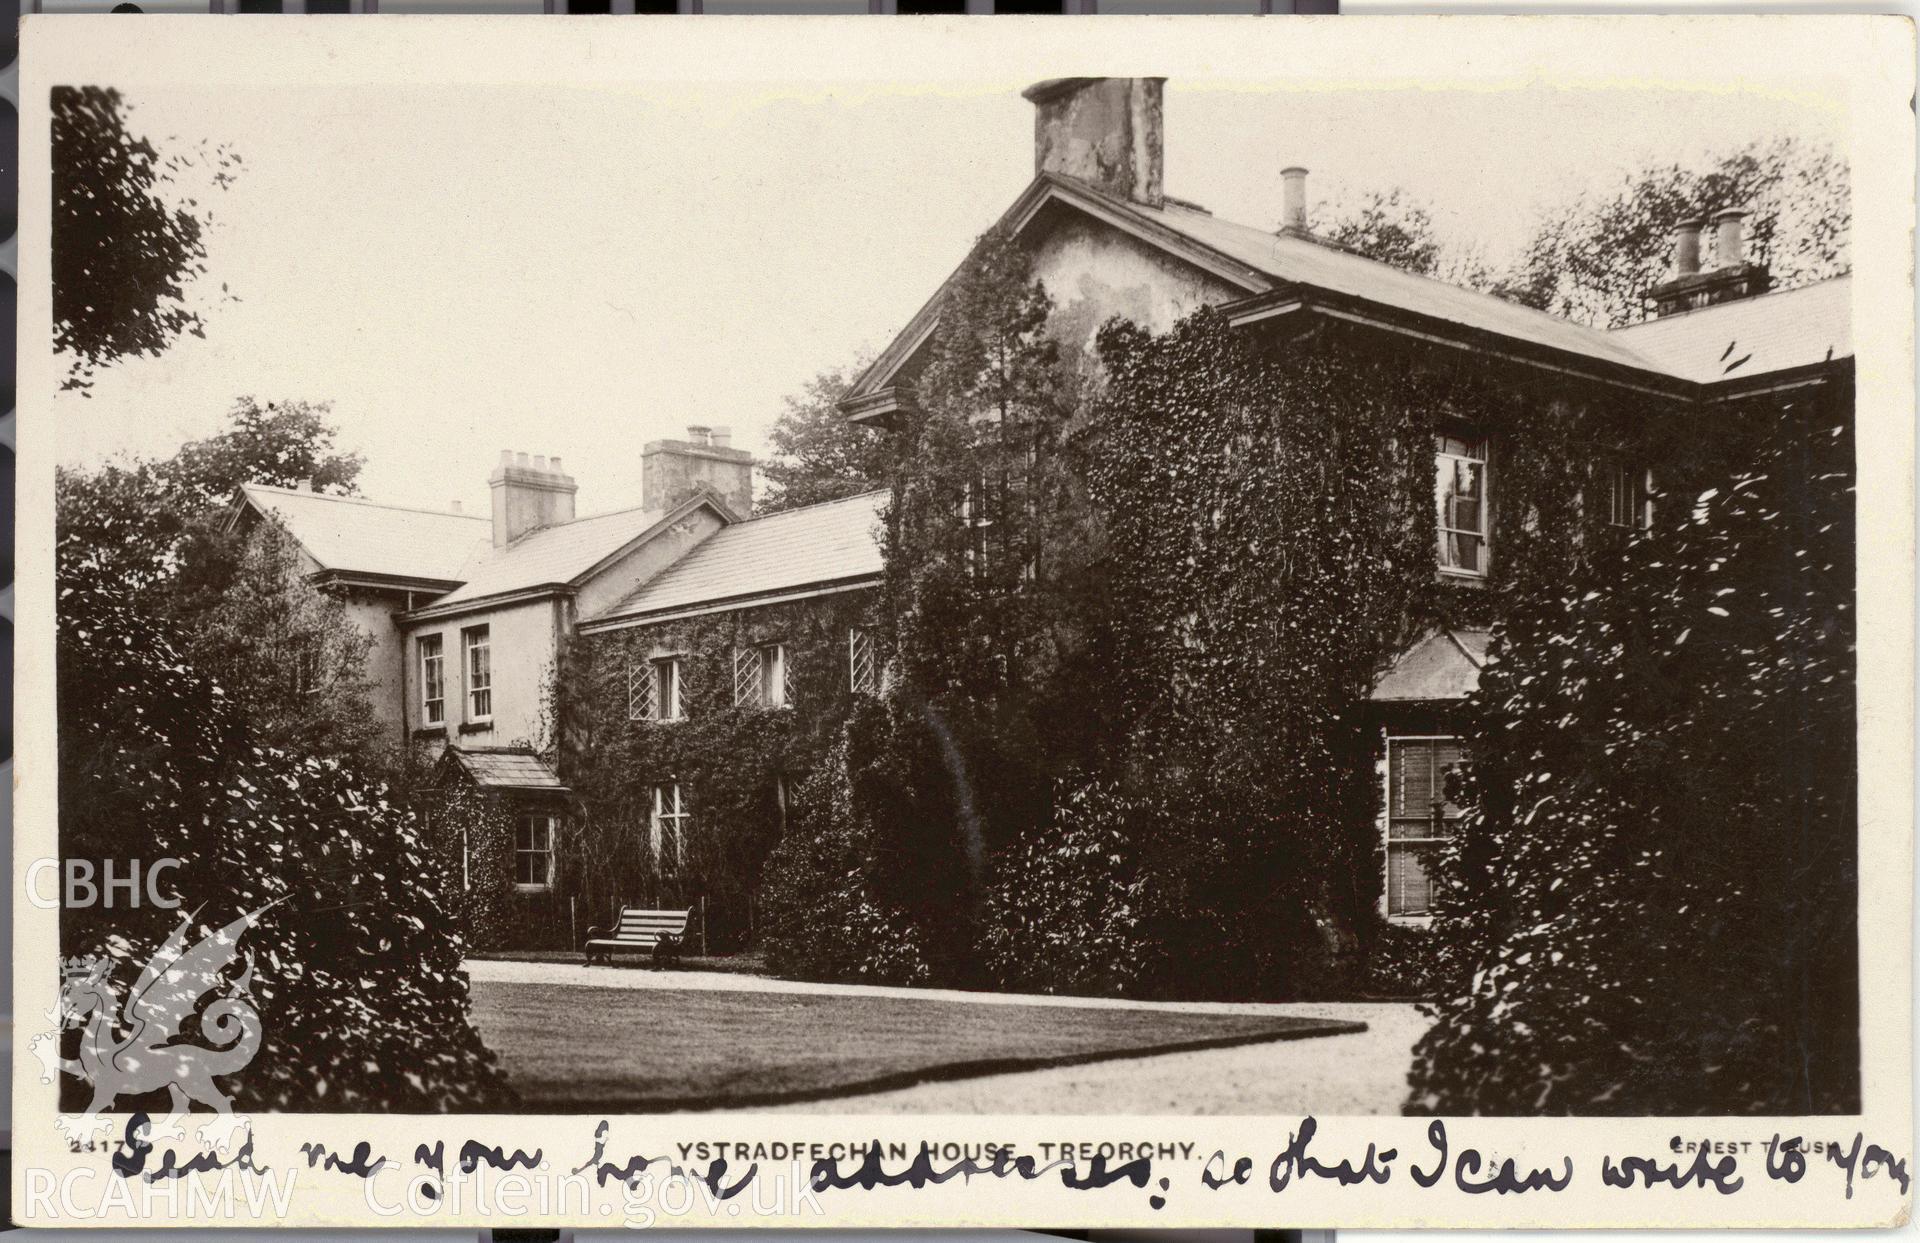 Digitised postcard image of Ystradfechan House, Treorchy, Ernest T. Bush. Produced by Parks and Gardens Data Services, from an original item in the Peter Davis Collection at Parks and Gardens UK. We hold only web-resolution images of this collection, suitable for viewing on screen and for research purposes only. We do not hold the original images, or publication quality scans.